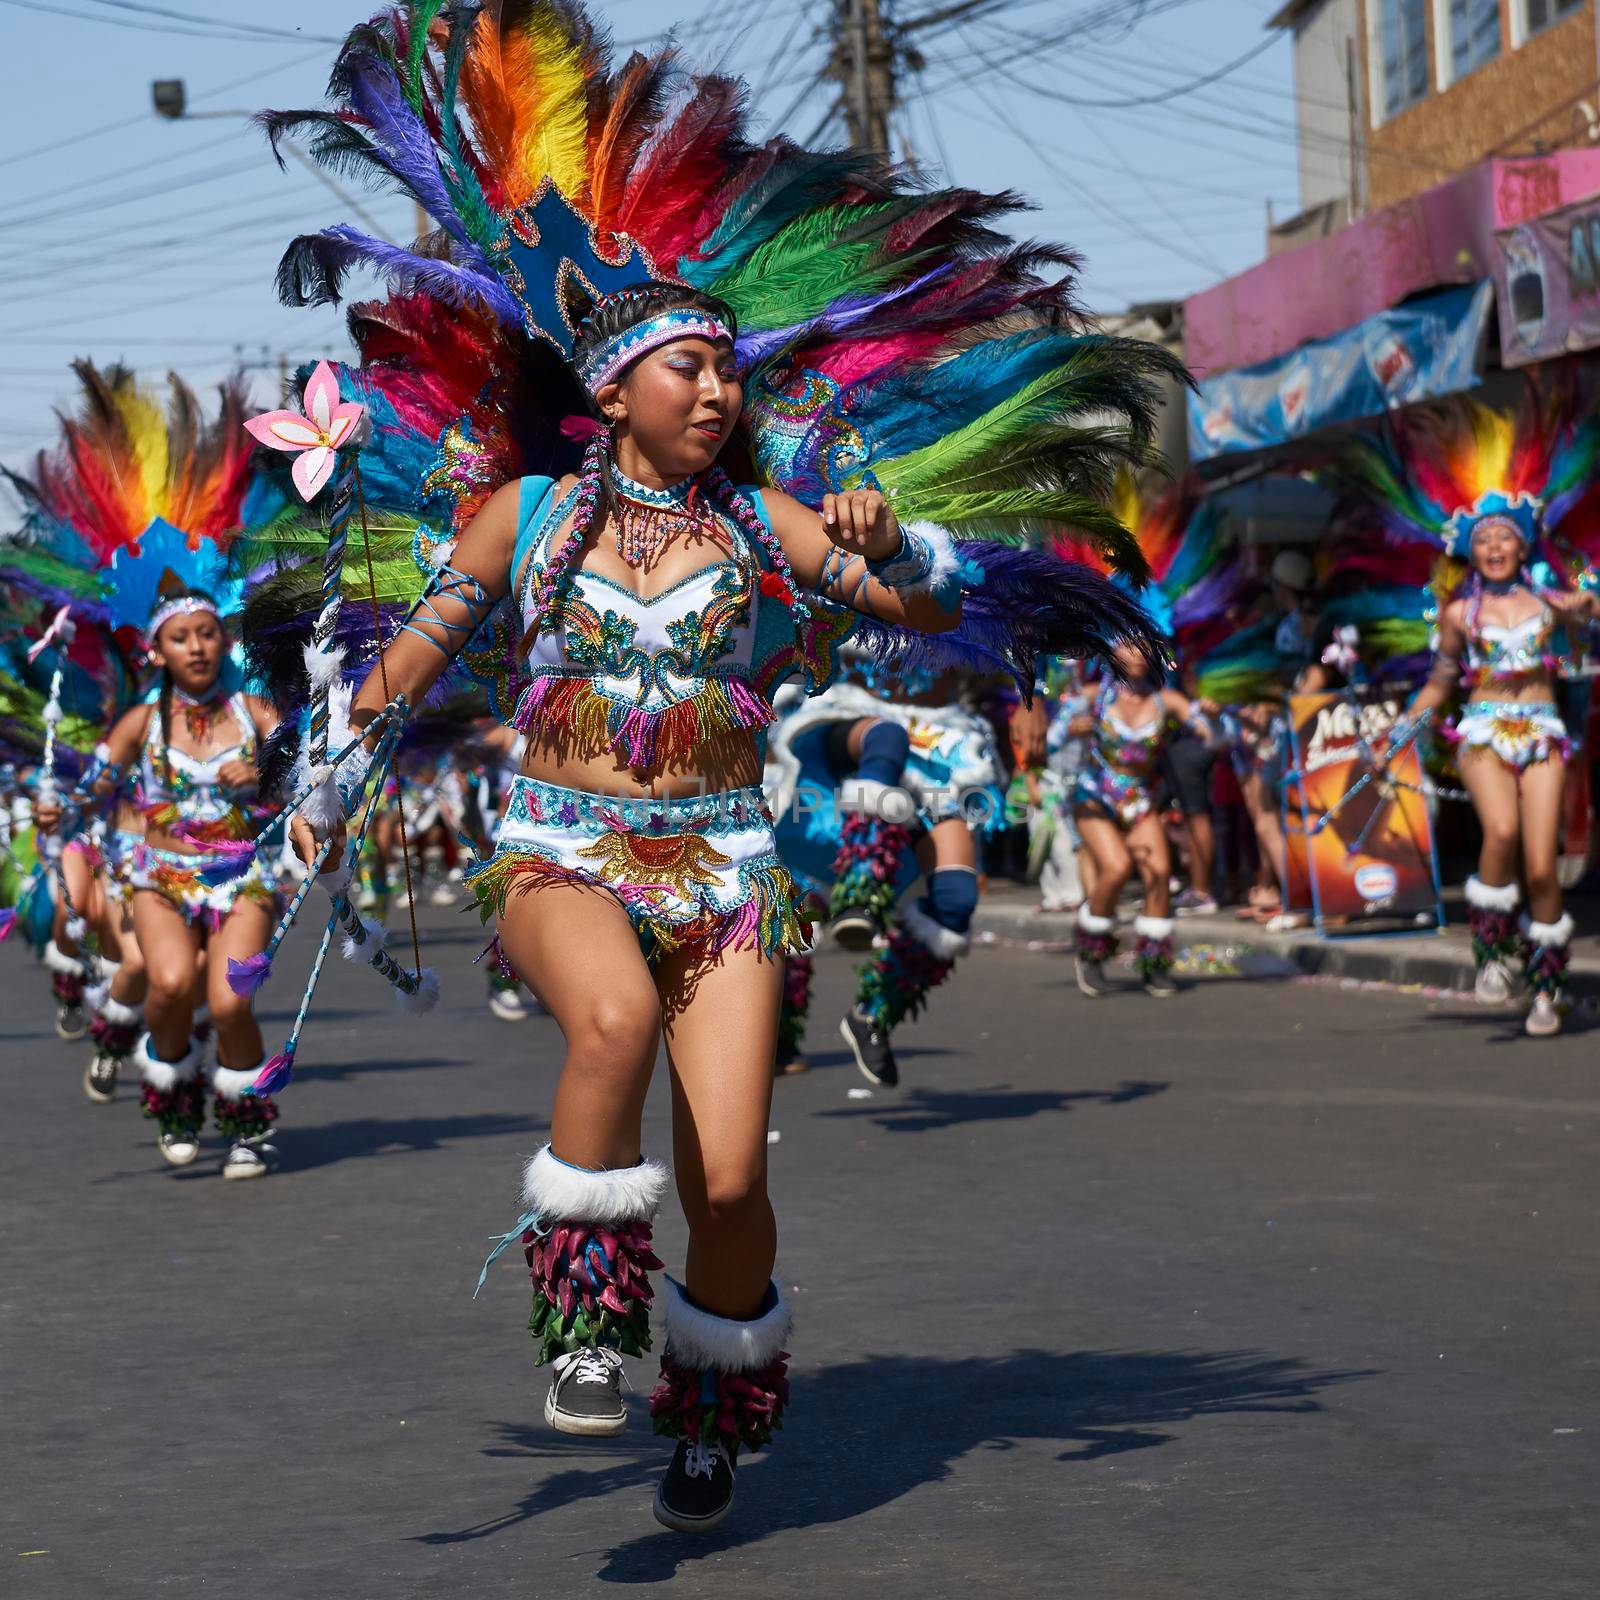 Tobas dancers at the Arica Carnival by JeremyRichards